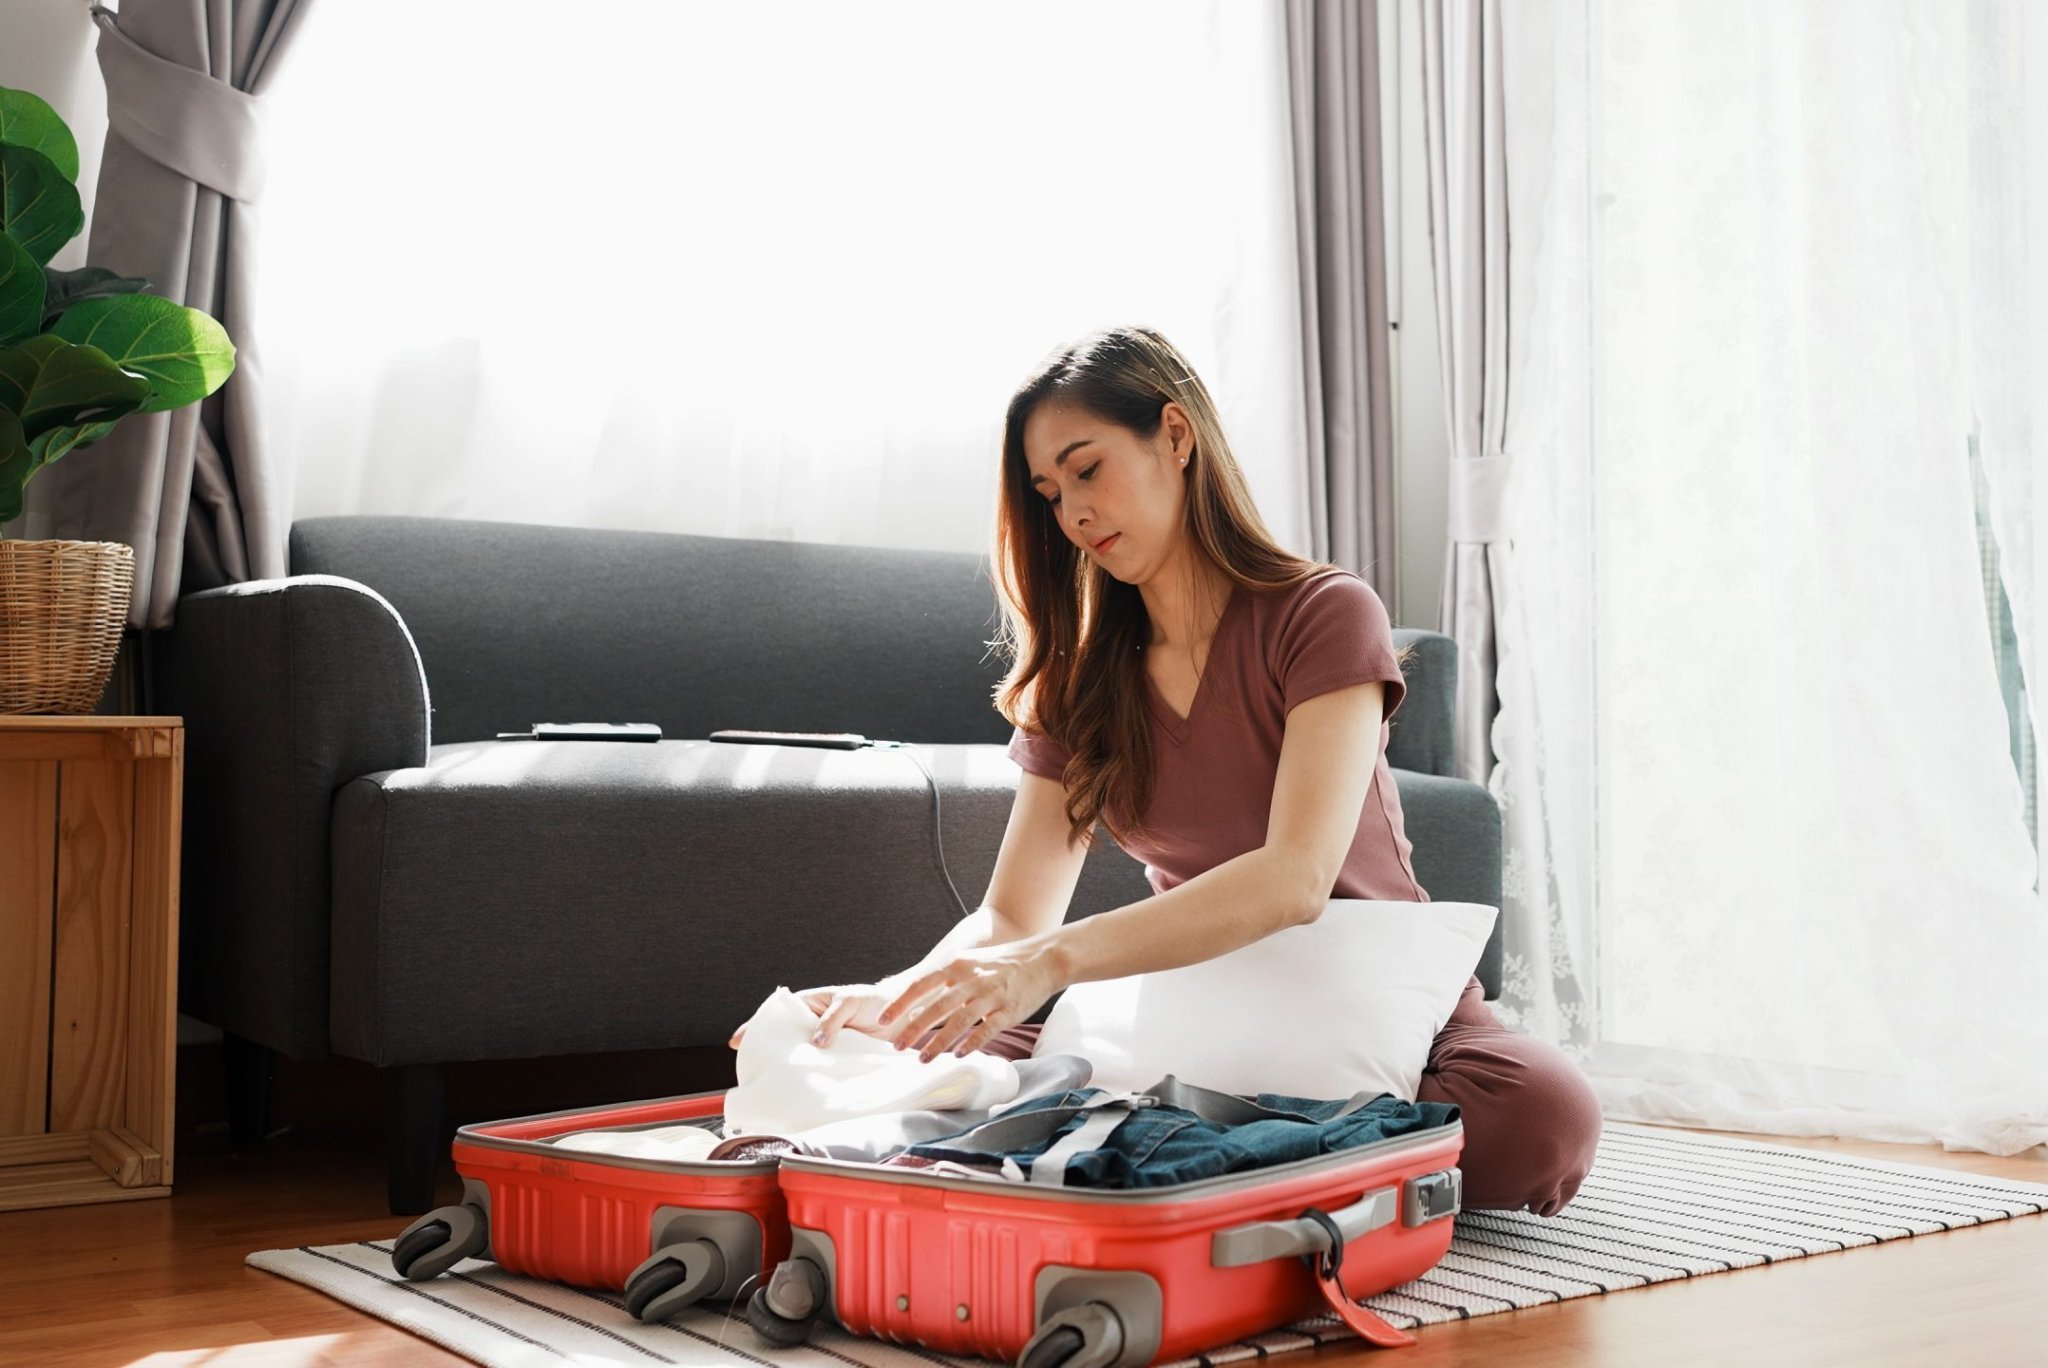 11 Suitcase Packing Mistakes That Could Ruin Your Vacation